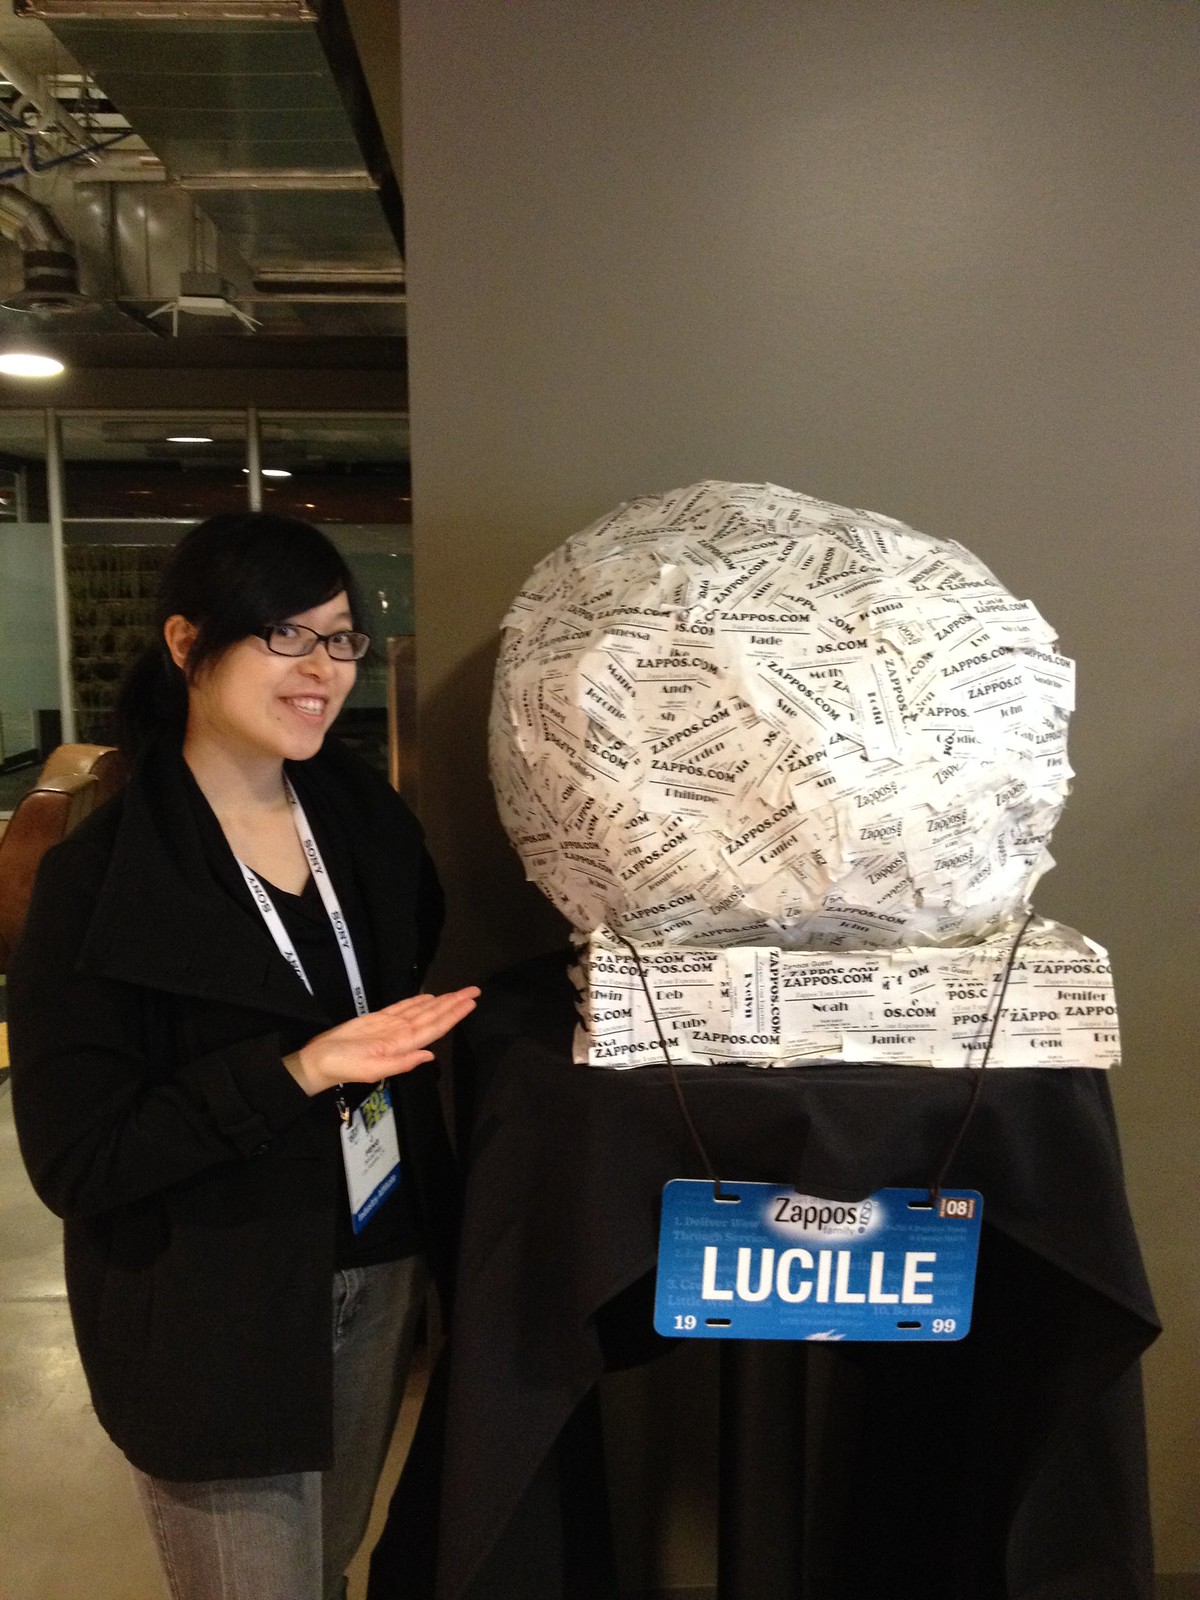 After the enlightening tour, I left my mark on â€œLucille Ball,â€ the ...